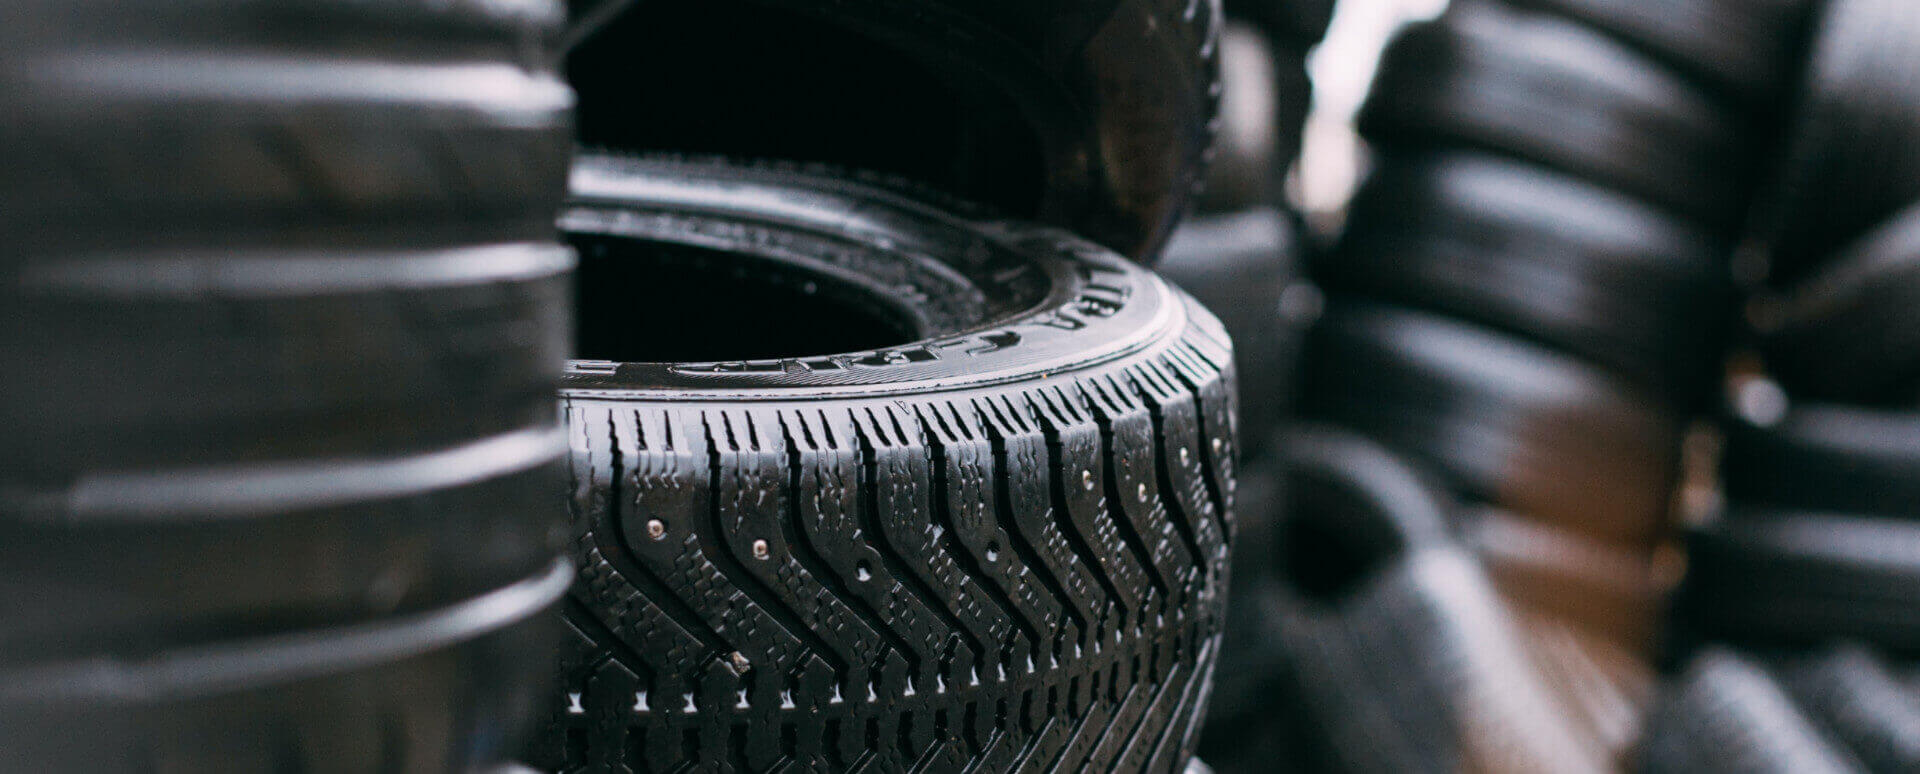 Tread Carefully - How to Look After Your Tyres